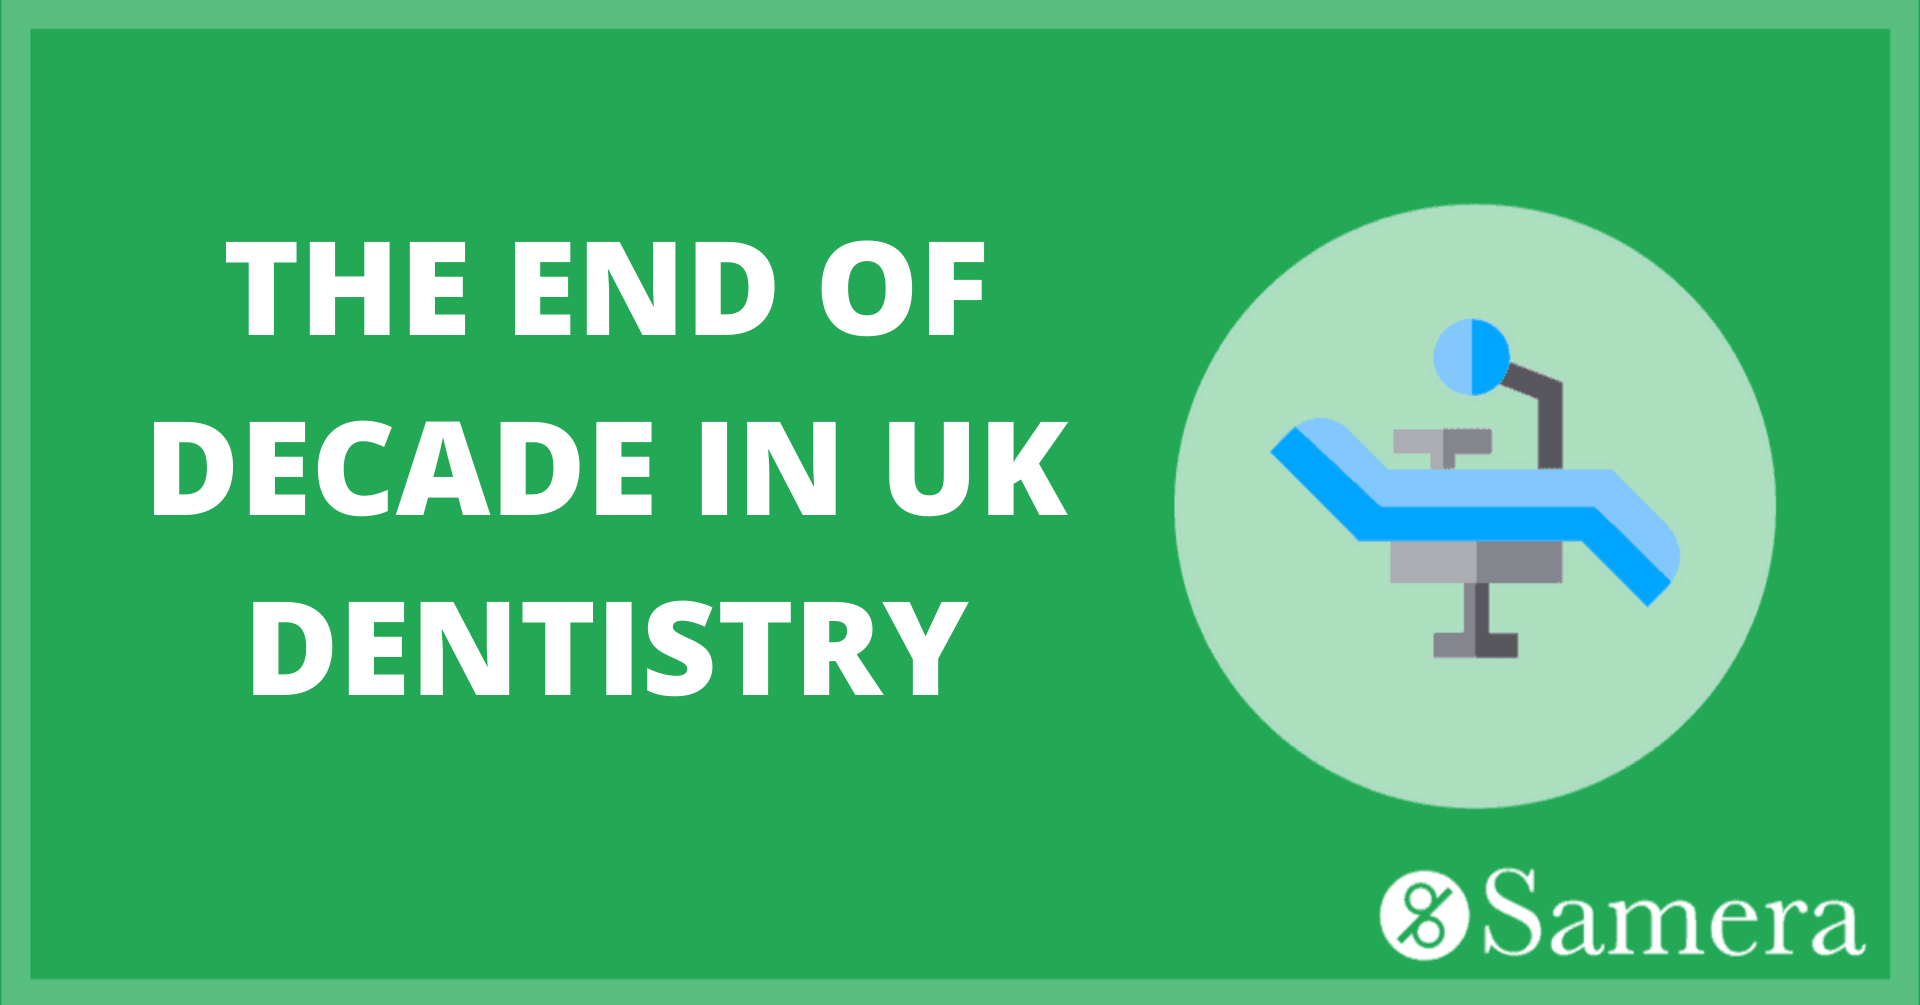 The End of a Decade in UK Dentistry